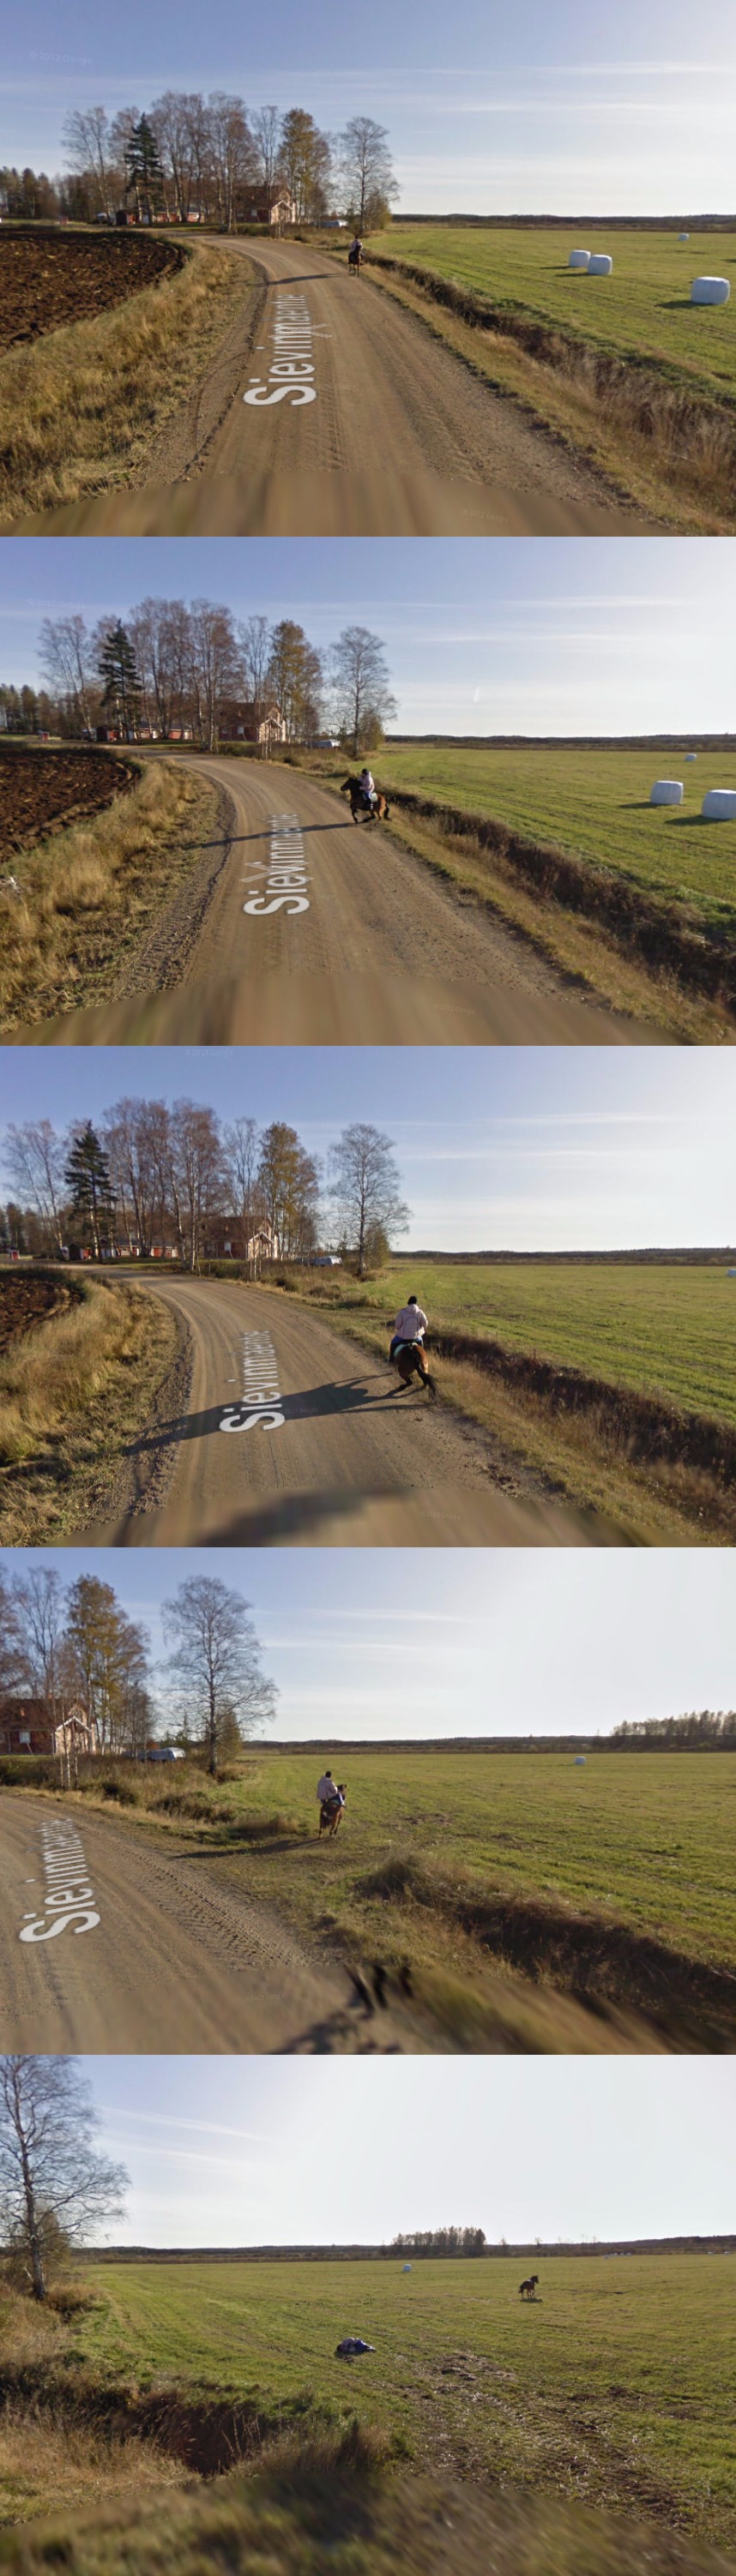 Google street view car meets someone riding a horse.